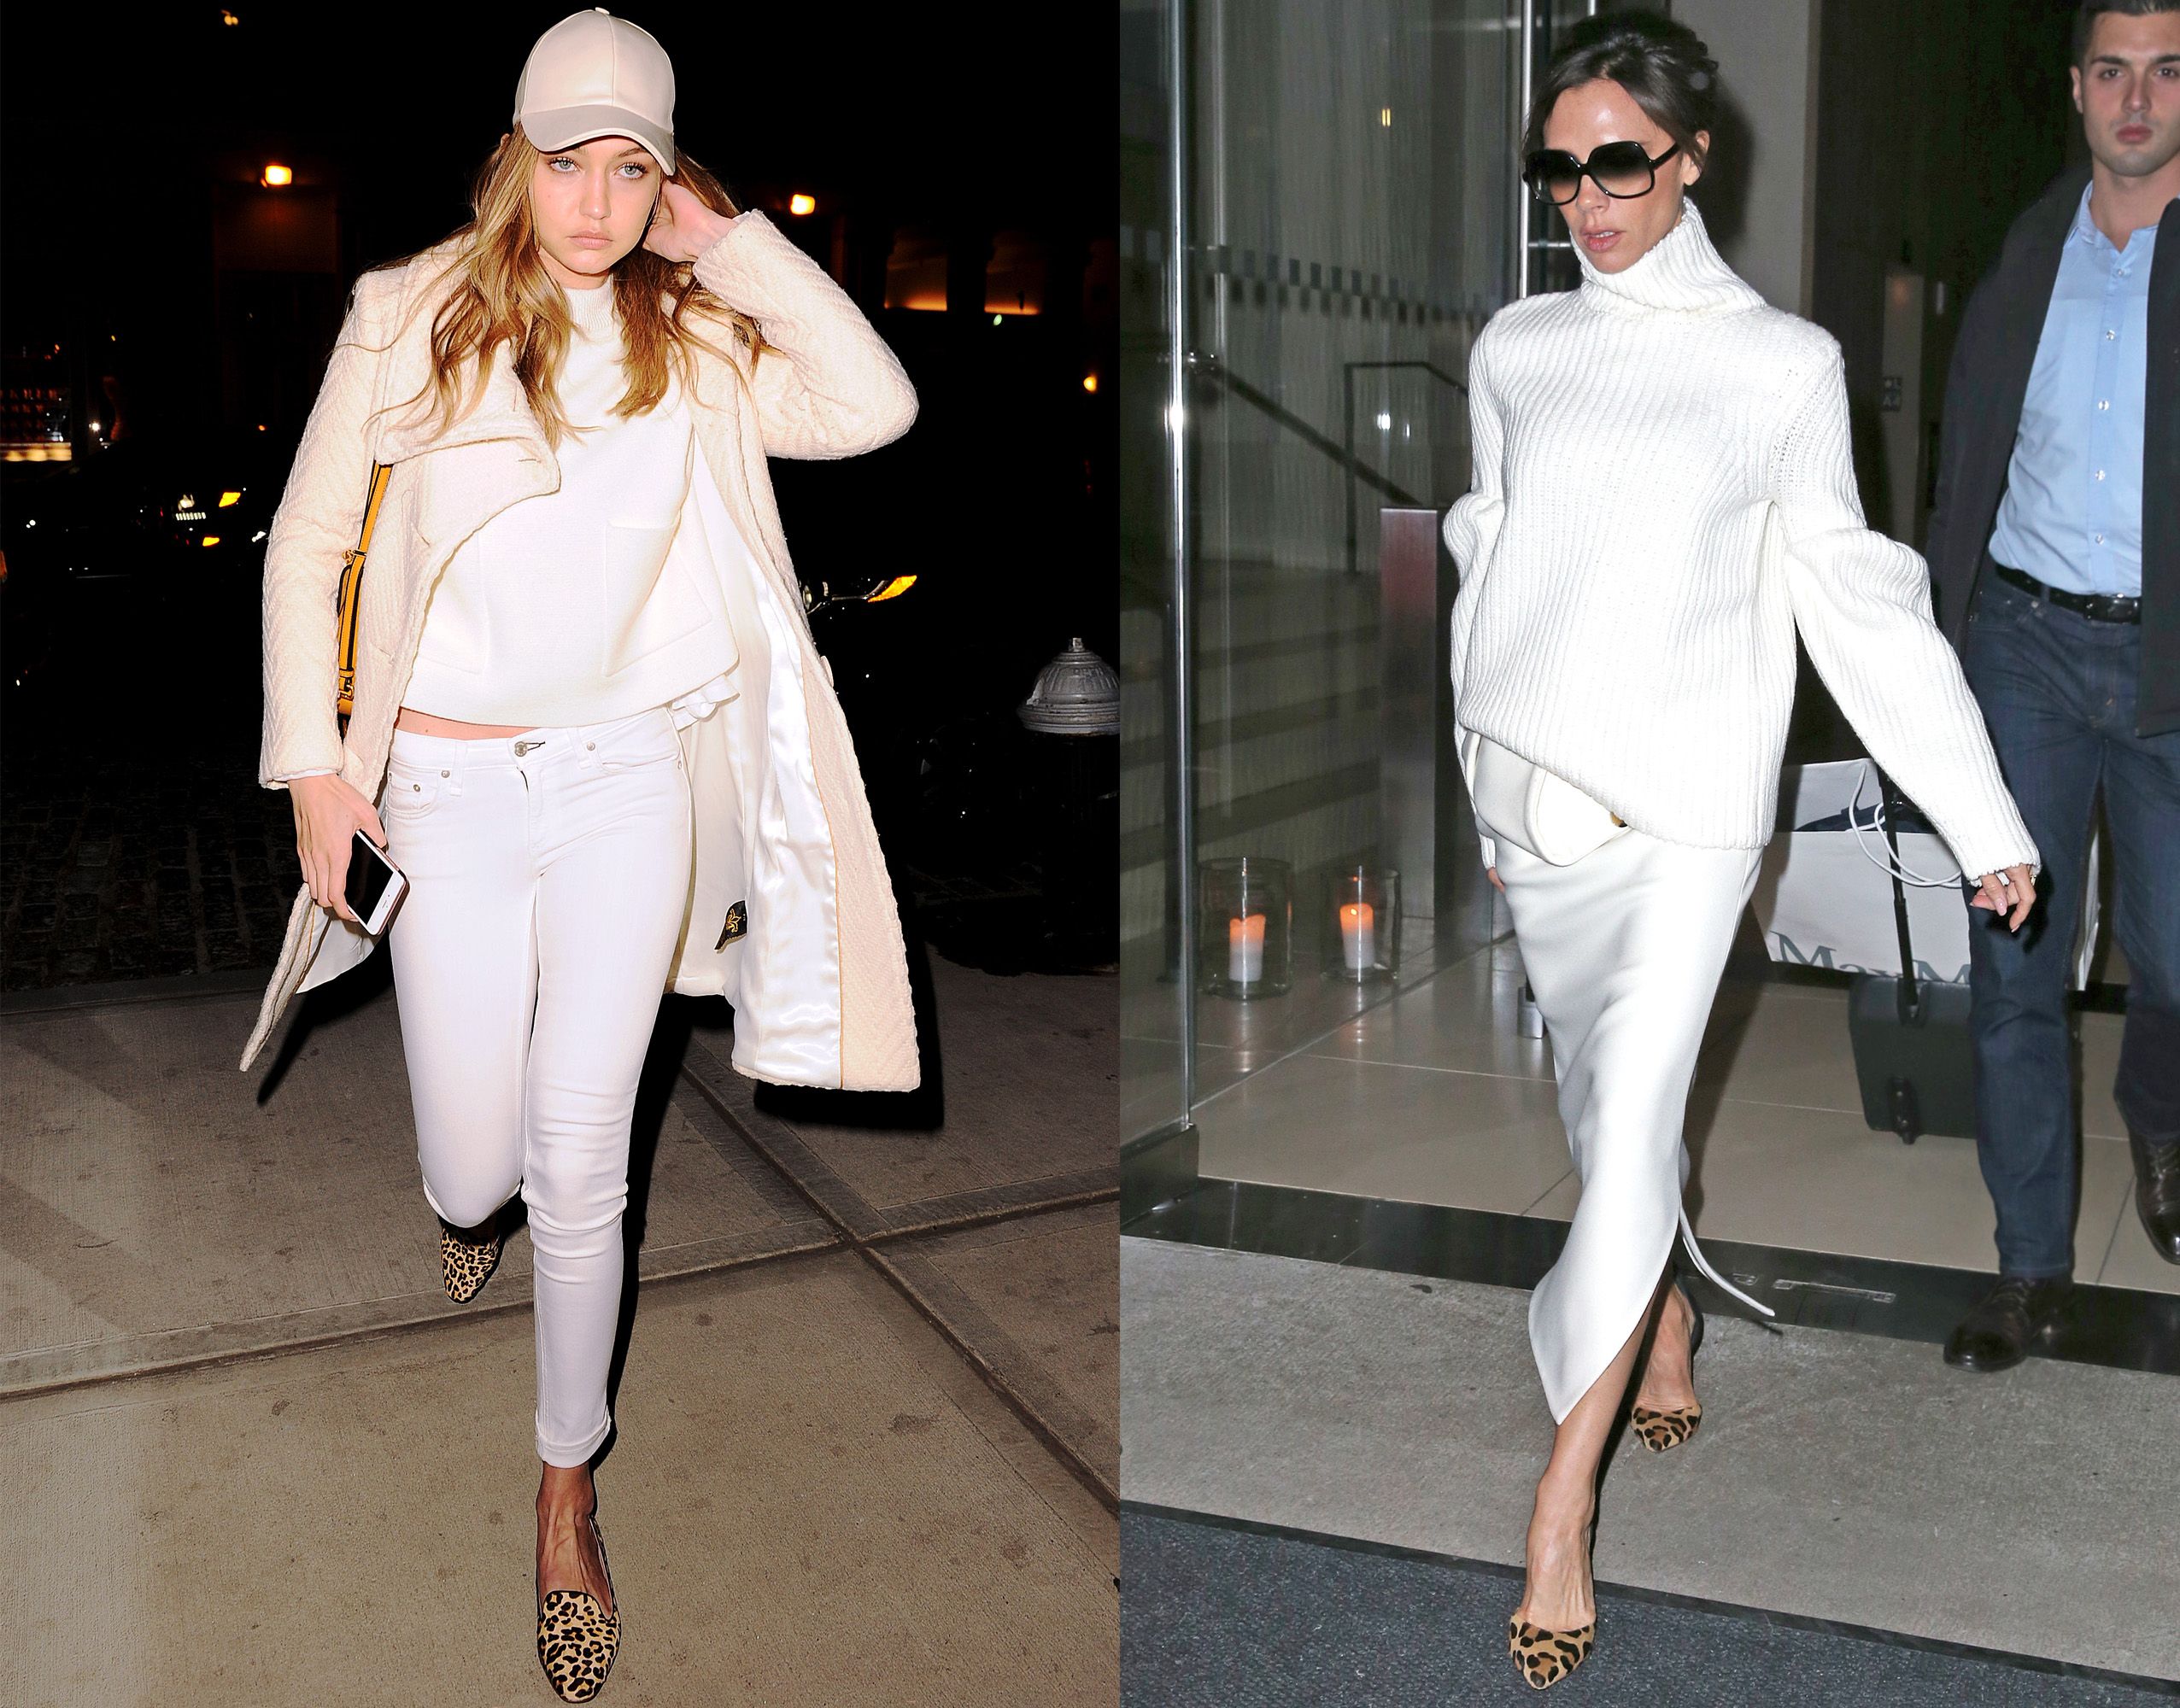 How to Wear White on White - All White Celebrity Style